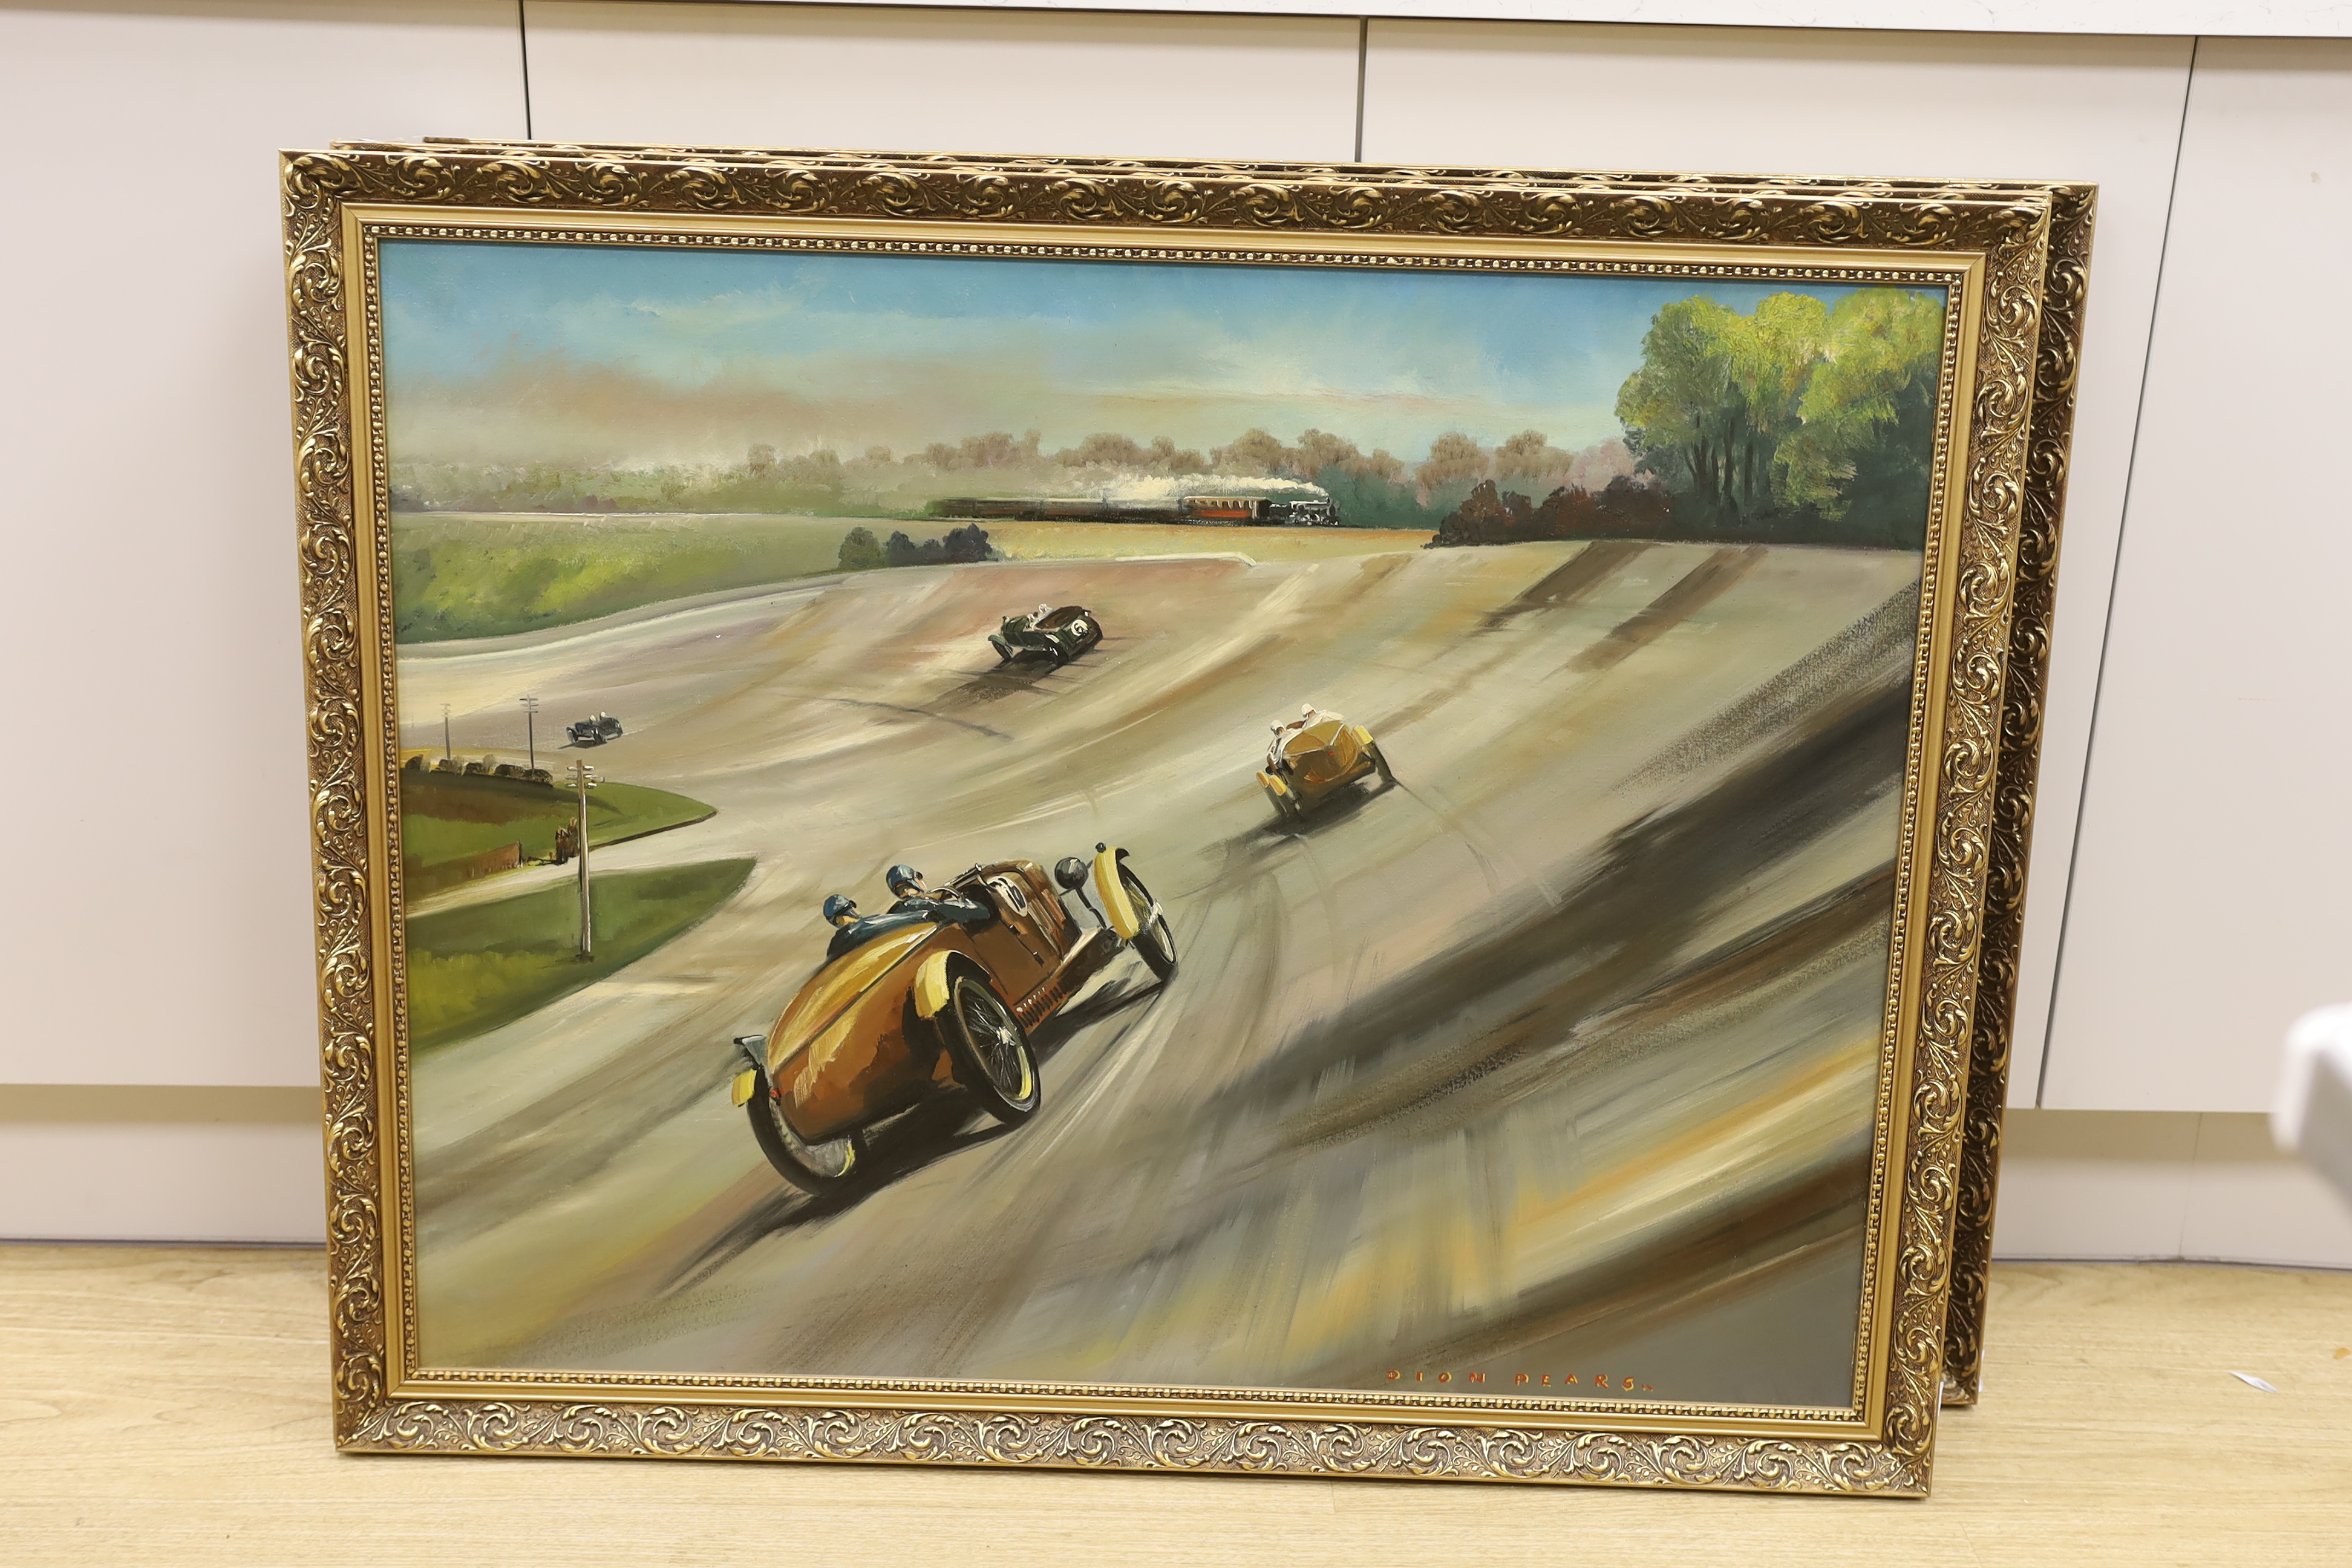 Dion Pears (1929-1985), oil on board, ‘Racing scene with distant locomotive’, signed, 69 x 90cm